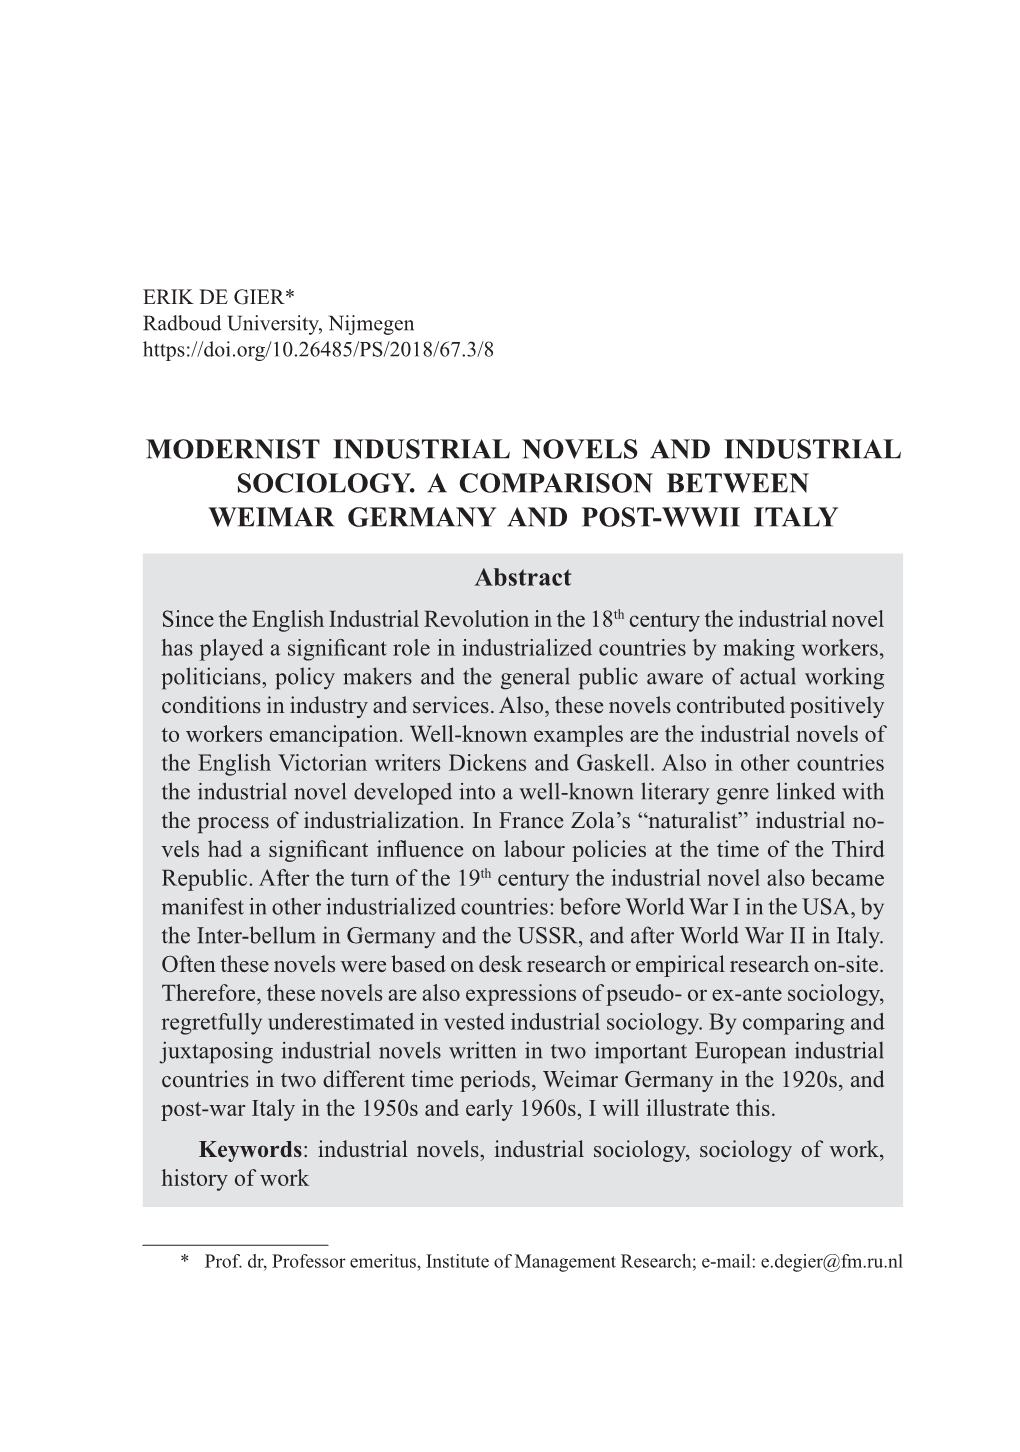 MODERNIST INDUSTRIAL NOVELS and INDUSTRIAL SOCIOLOGY. a COMPARISON BETWEEN WEIMAR GERMANY and POST-WWII ITALY